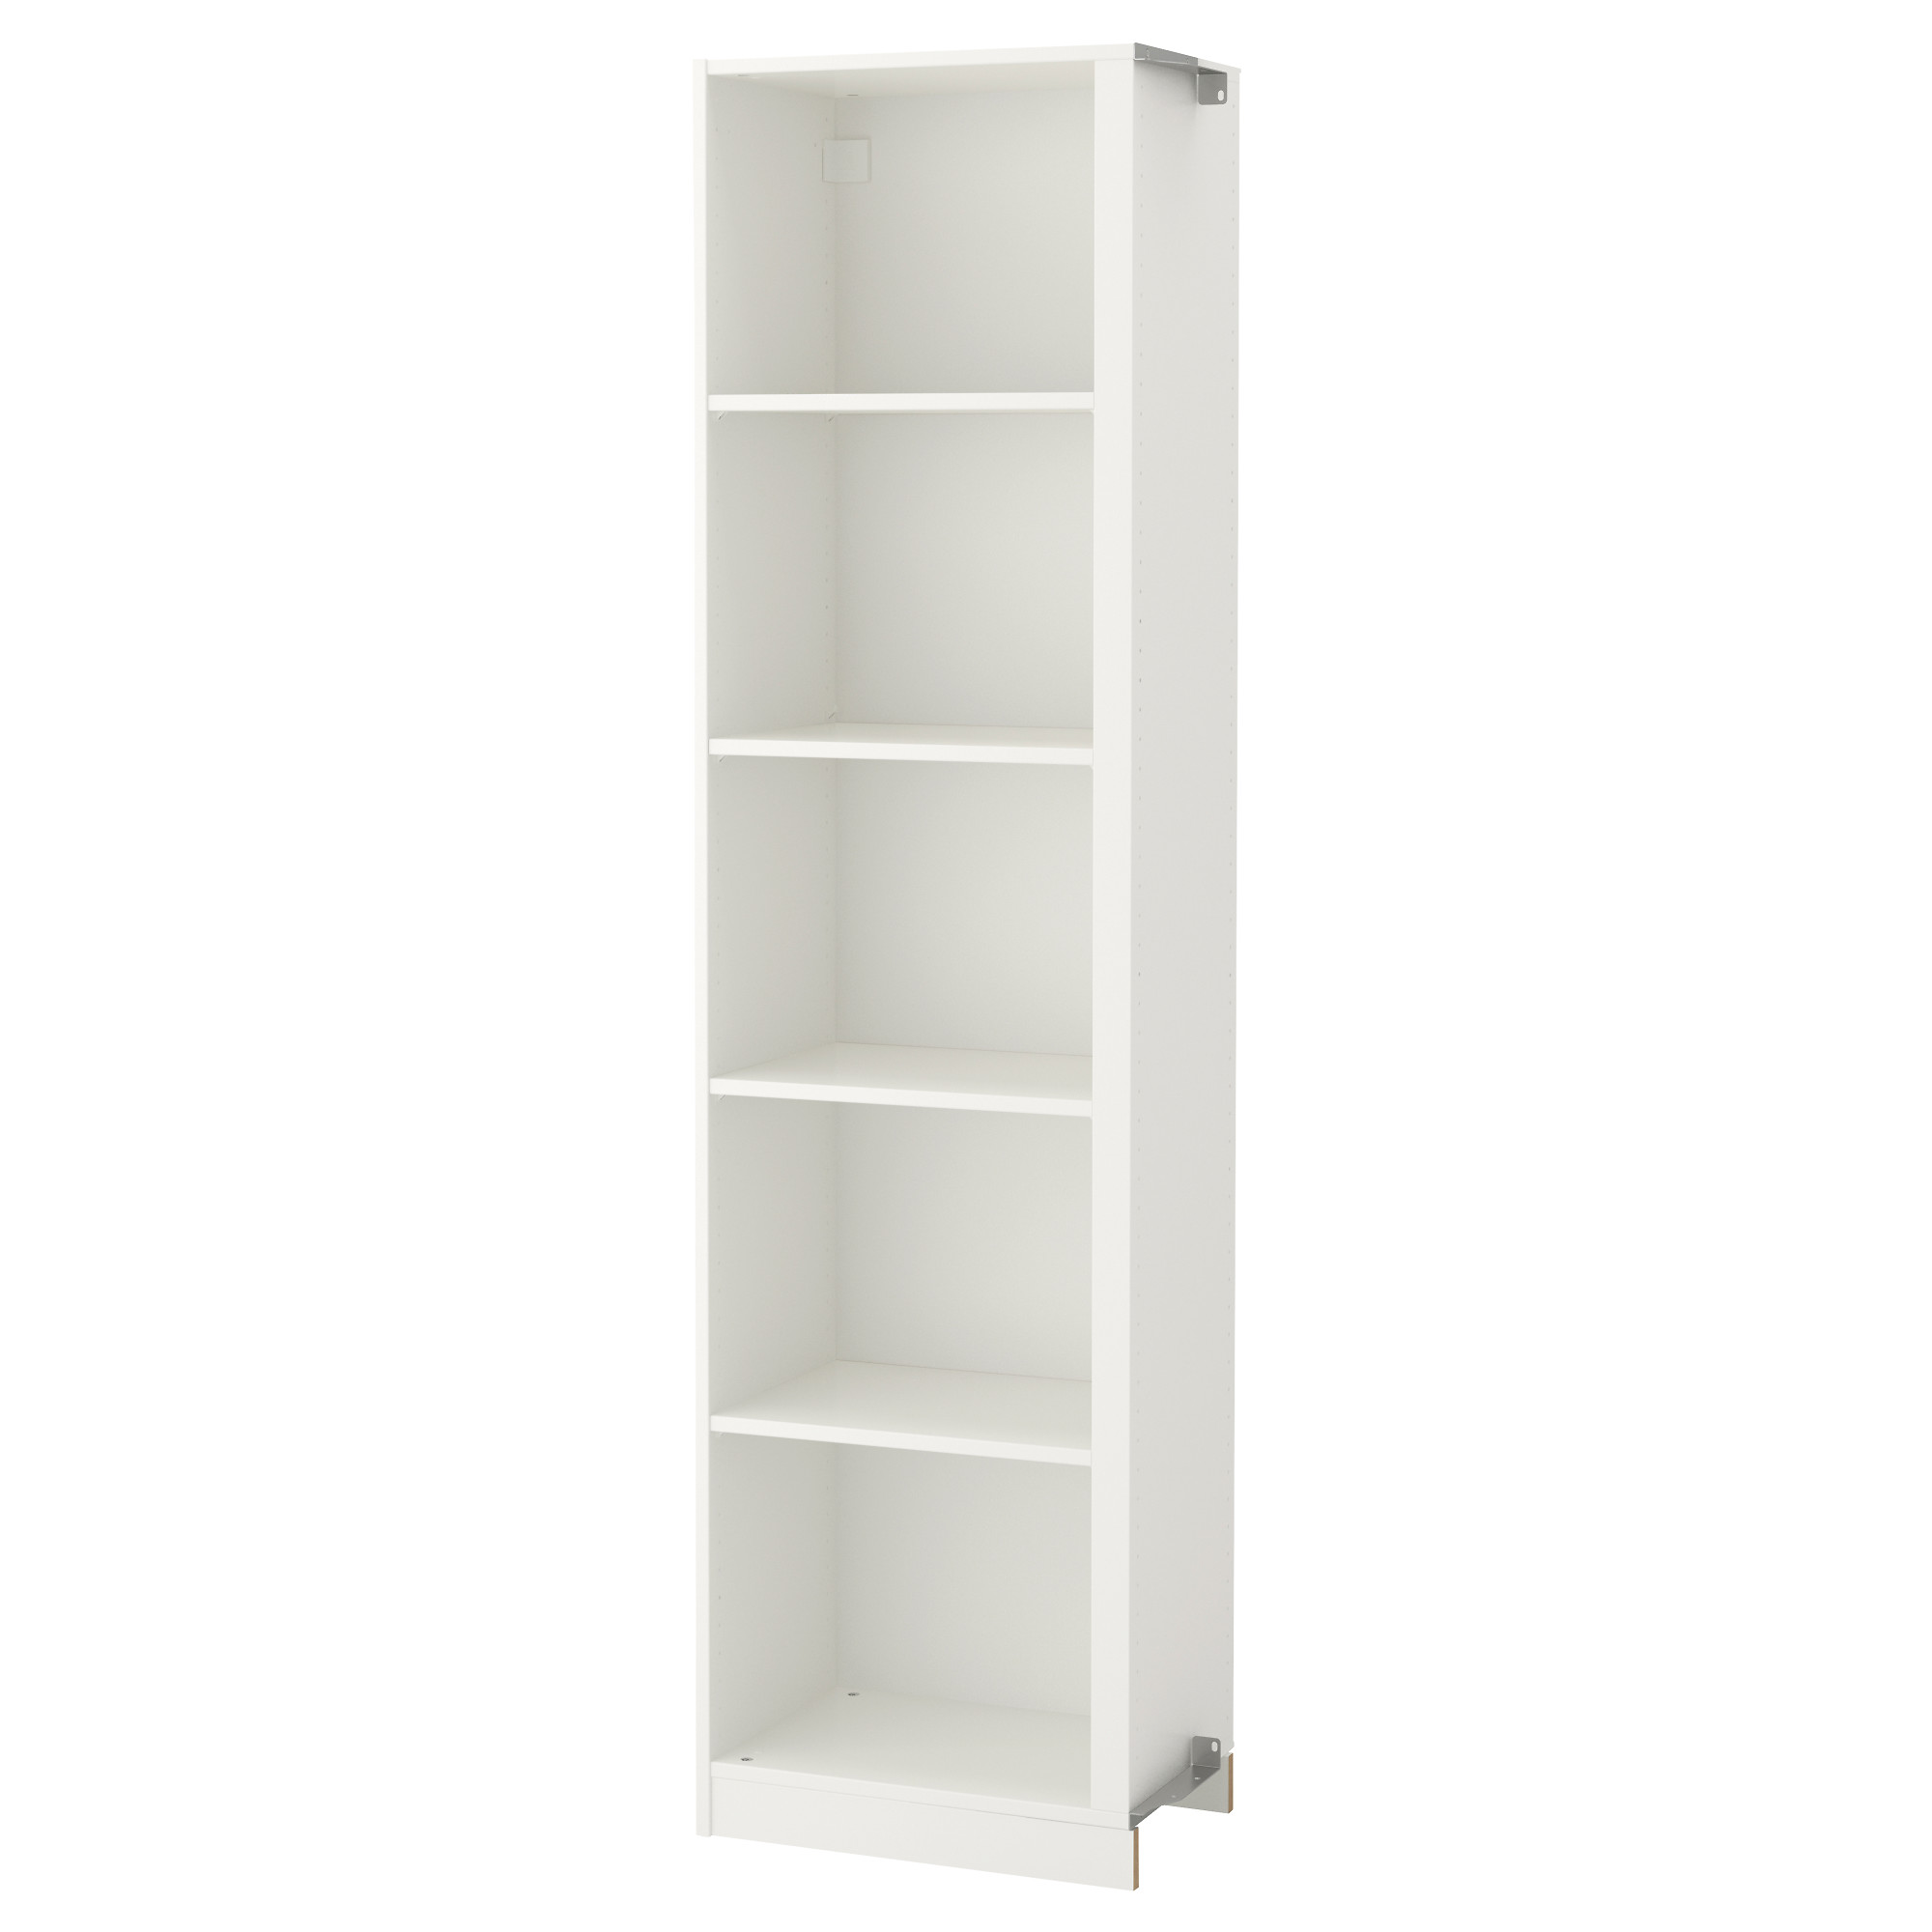 PAX add-on corner unit with 4 shelves